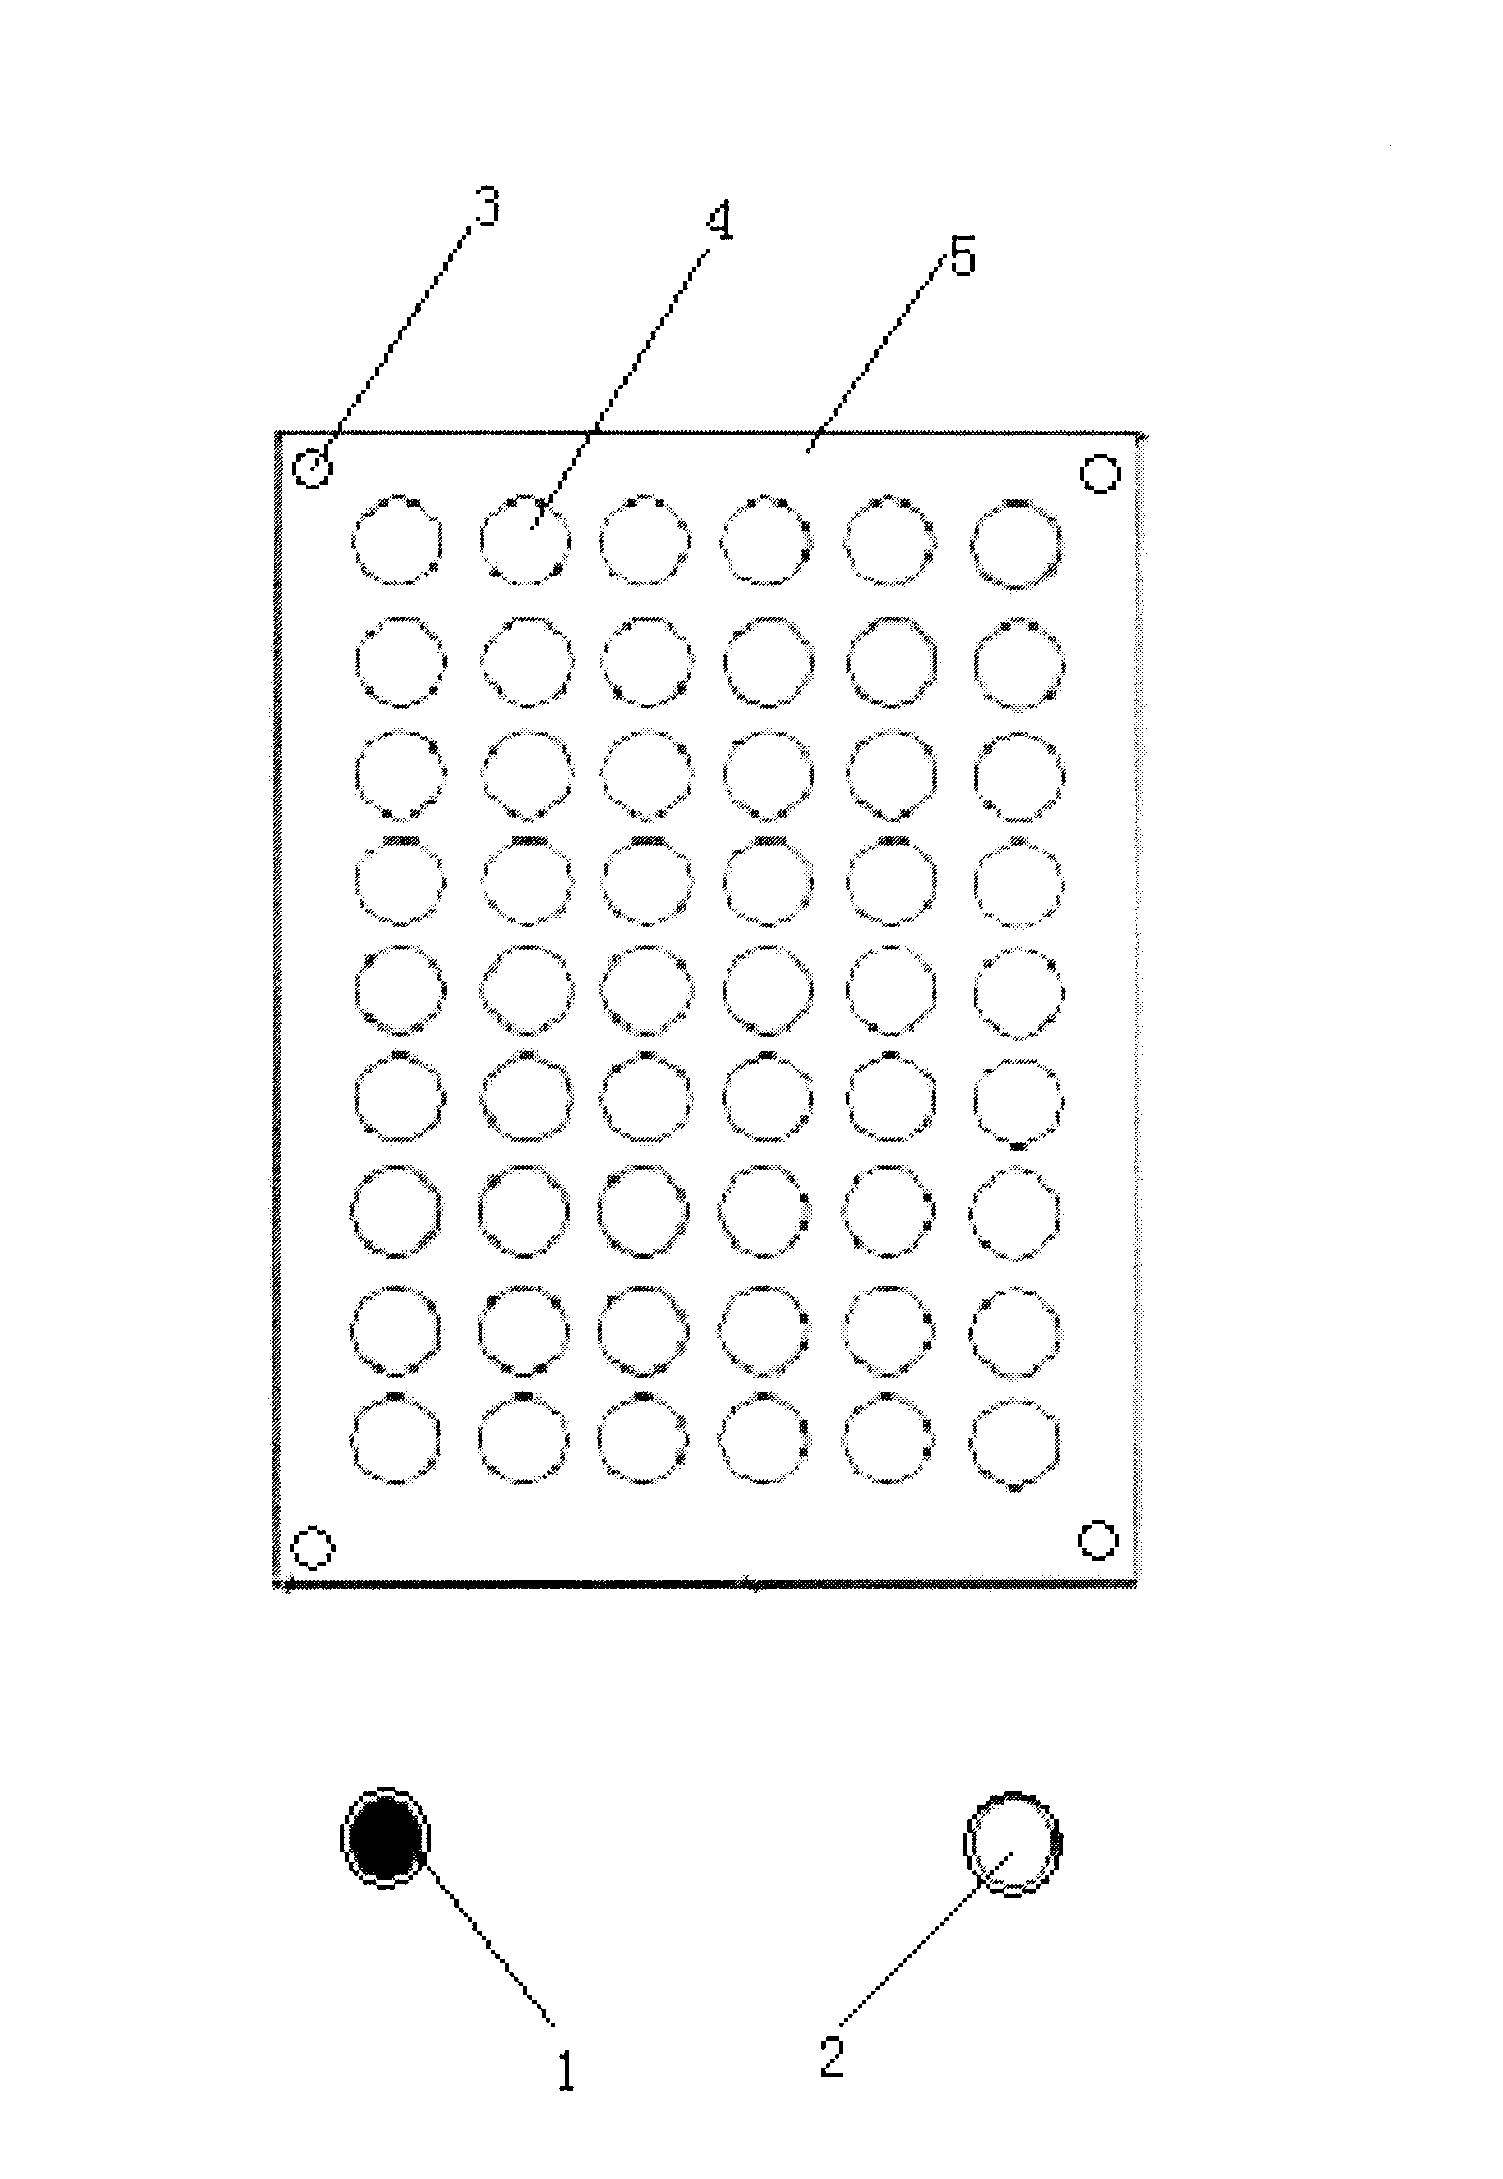 Chessboard for automatically separating black pieces and white pieces of go chess